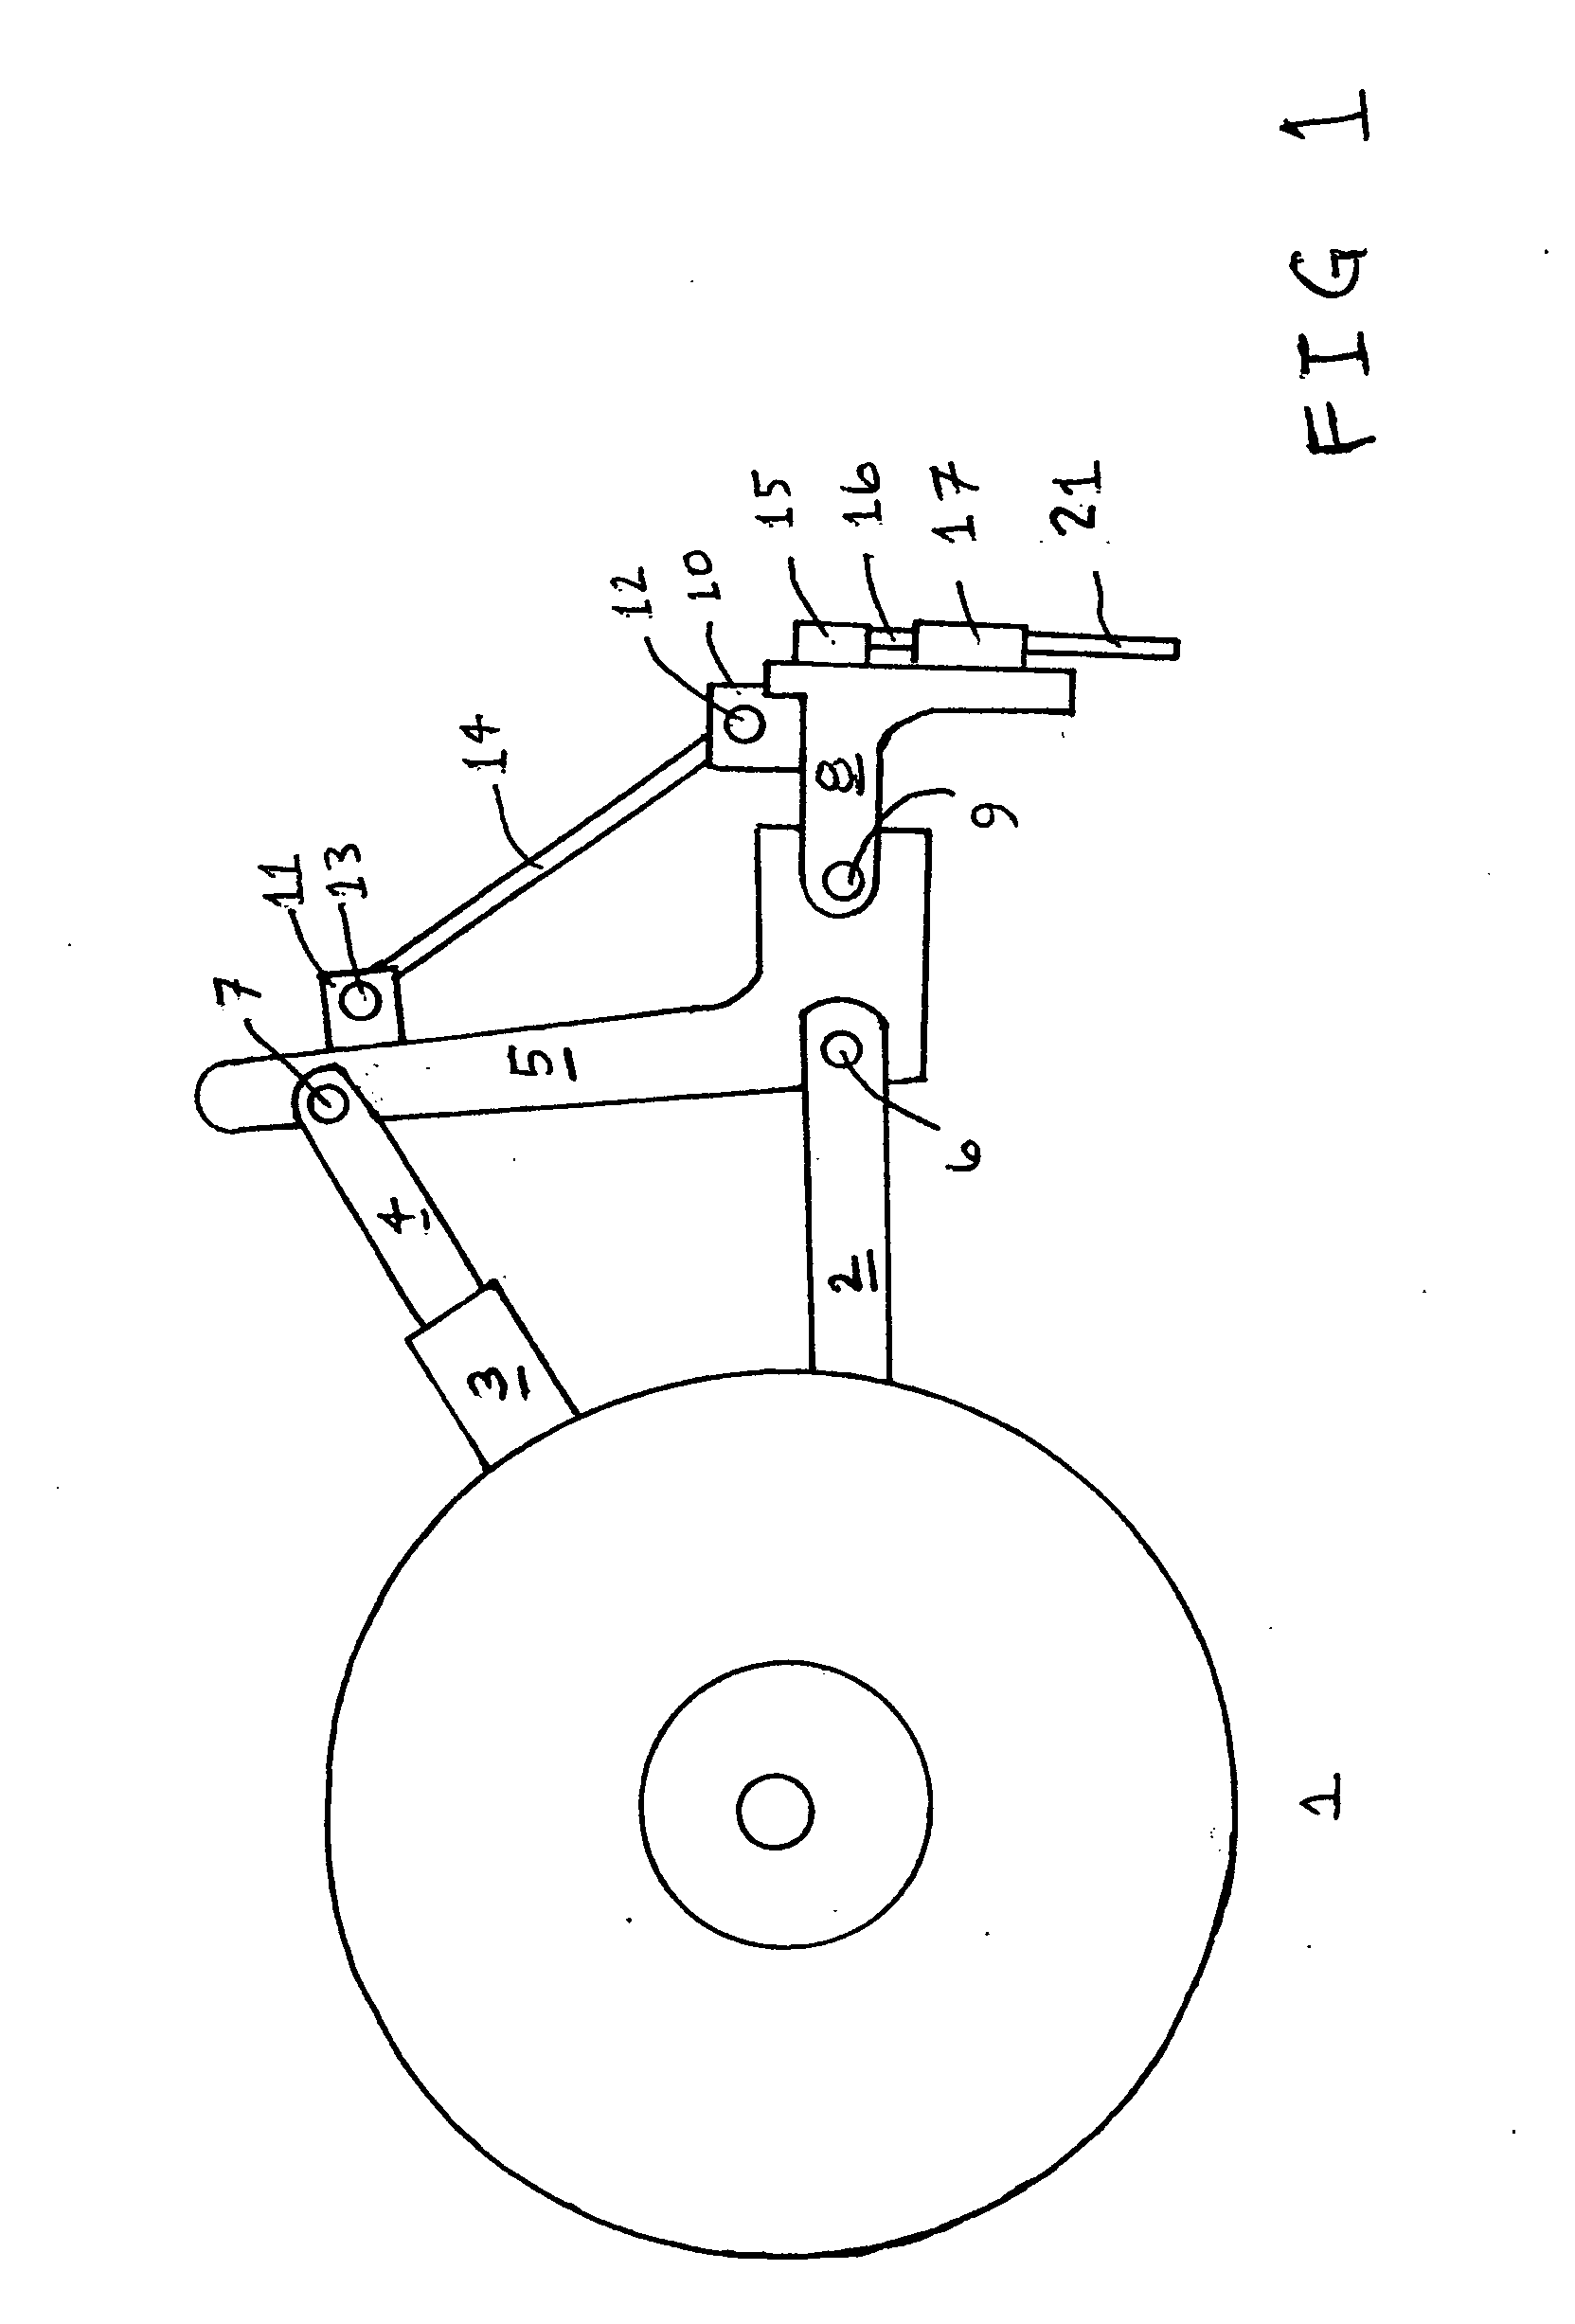 Grapple apparatus for a three point hitch